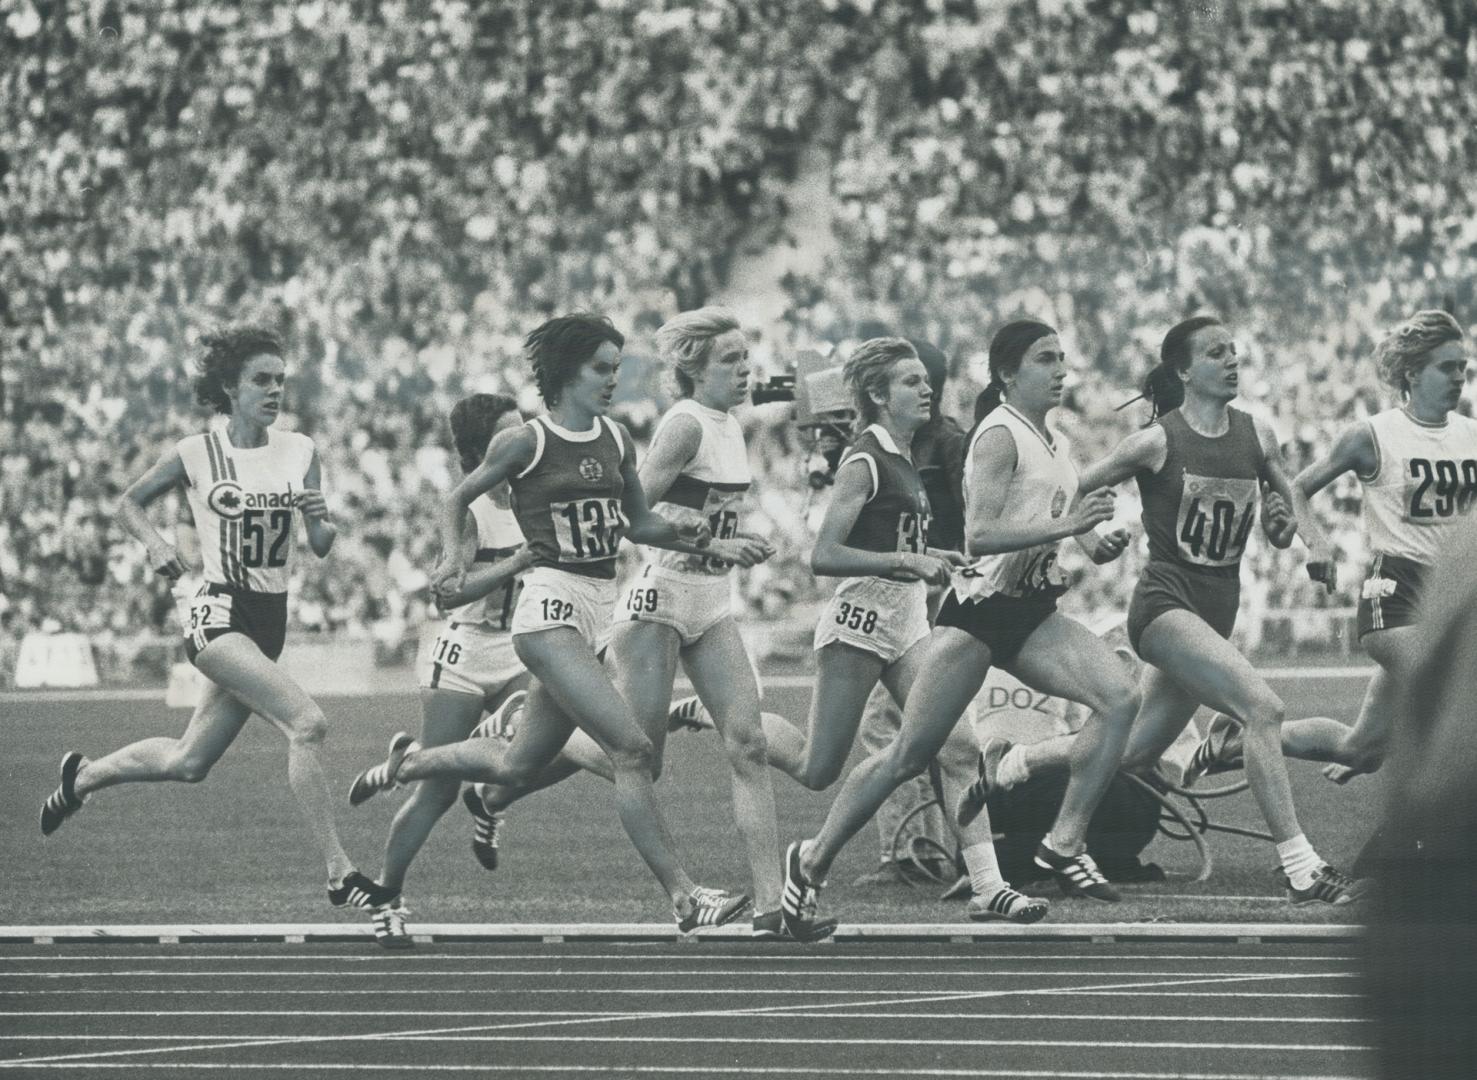 The career effort of veteran Toronto middle distance runner Abby Hoffman was perhaps definitive performance of our Olympic team. Three times in four d(...)